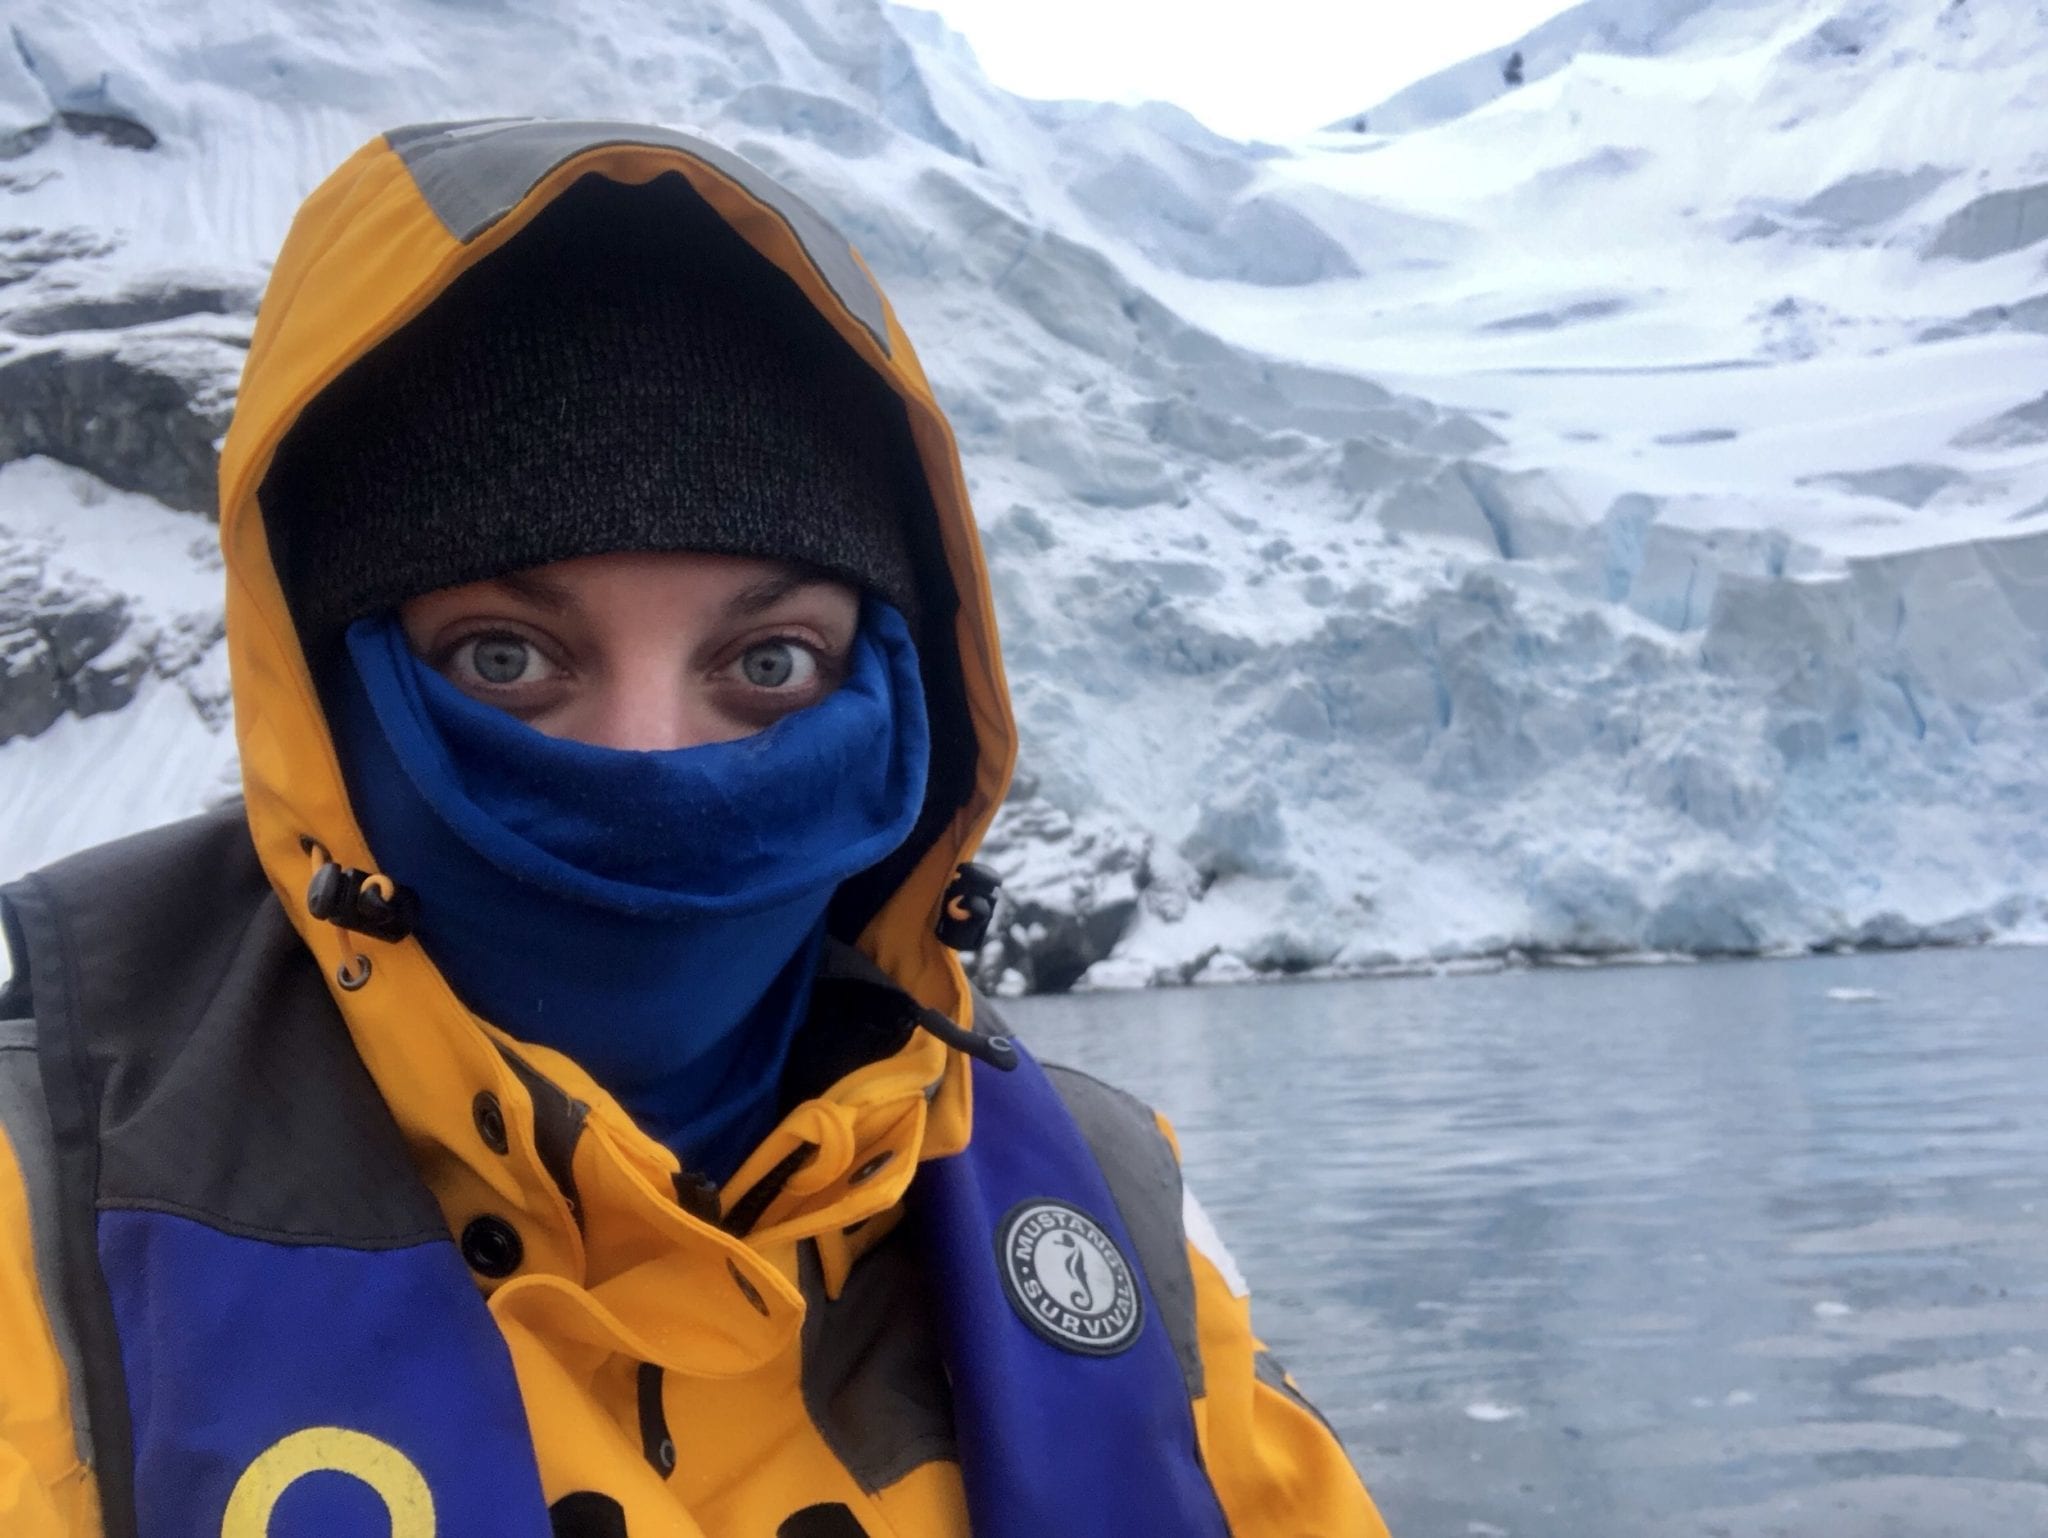 Kate taking a selfie in front of a big snowy wall. She has her yellow hood up, black hat on, and a bright blue buff covering her face beneath the eyes.